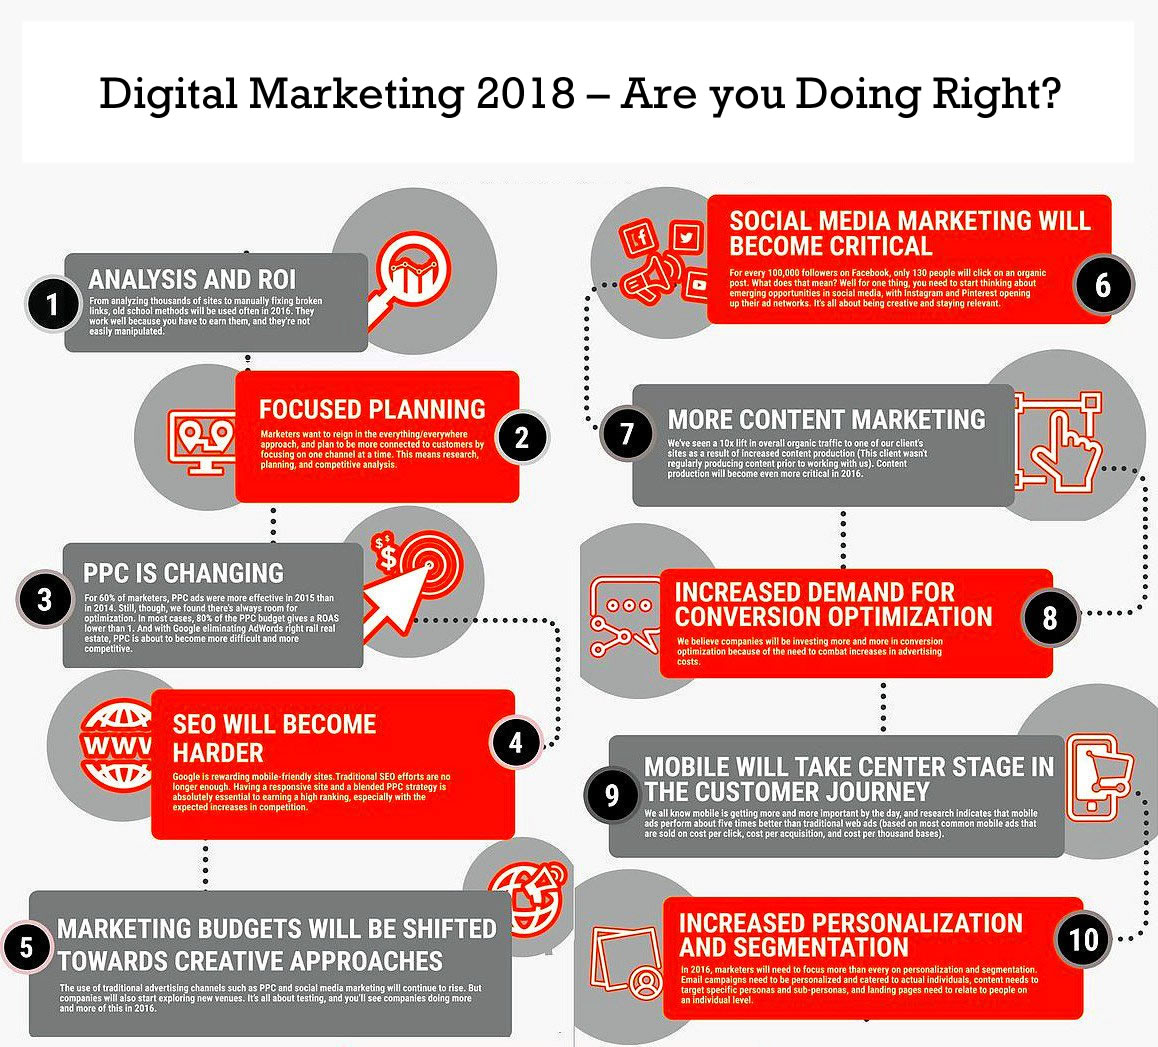 Digital Marketing 2018 – Are you Doing Right?